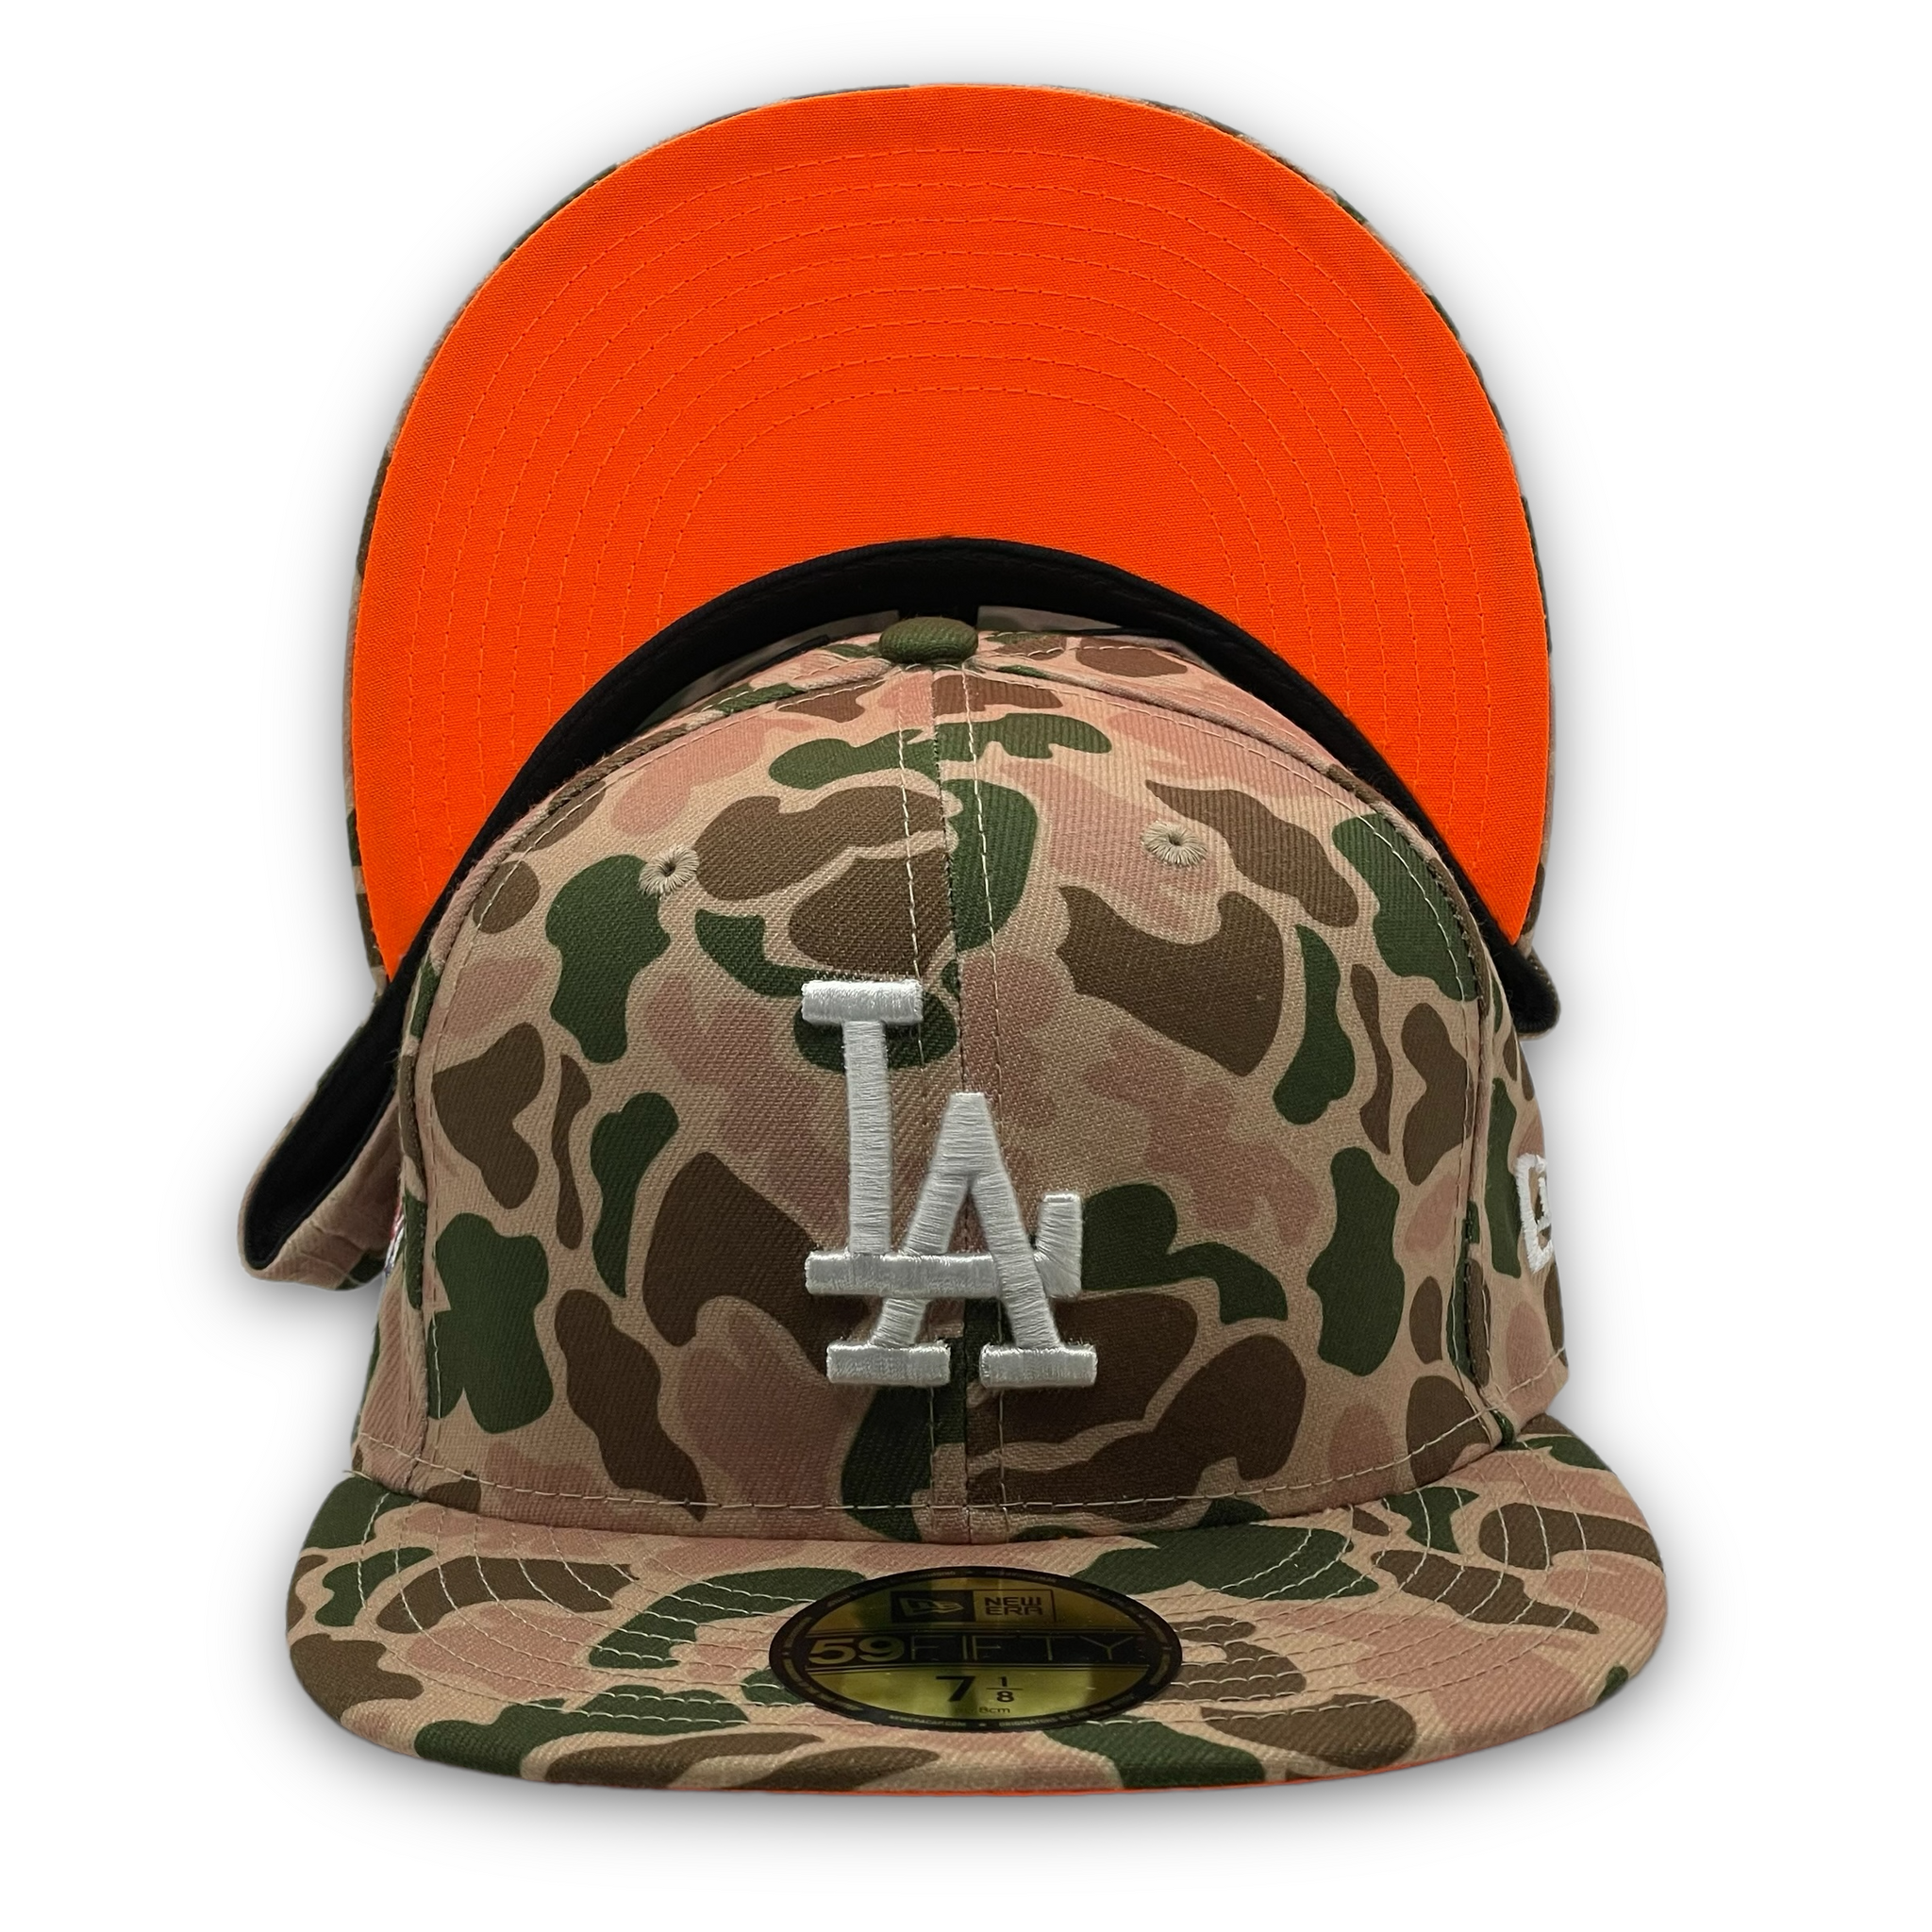 Los Angeles Dodgers On Field Baseball Cap Hat Camouflage 59Fifty